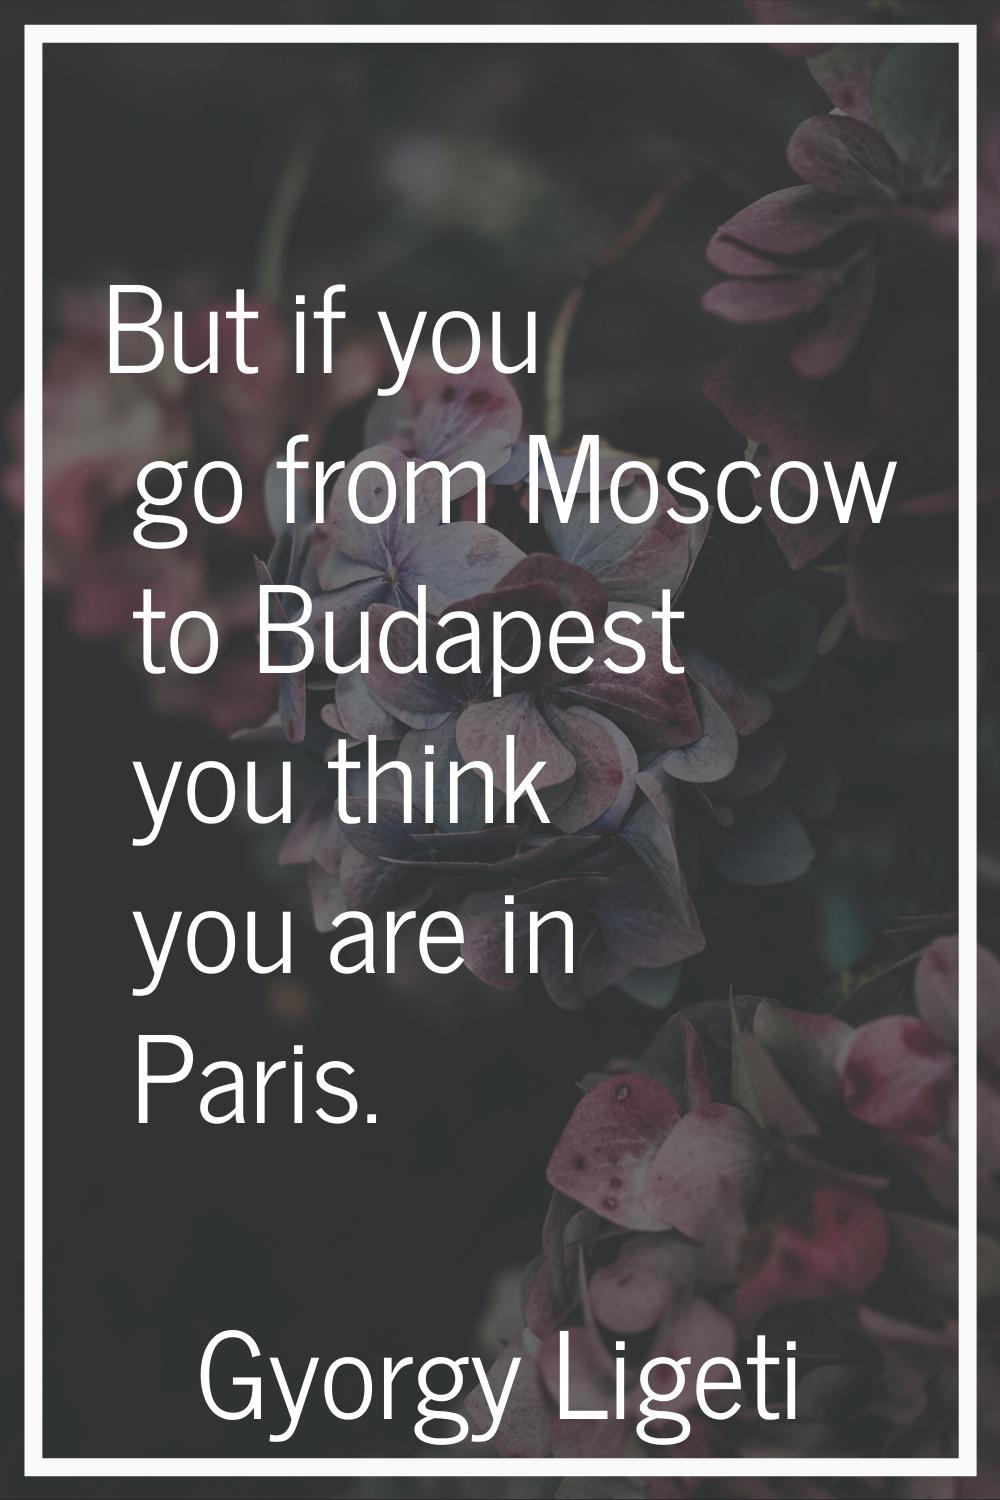 But if you go from Moscow to Budapest you think you are in Paris.